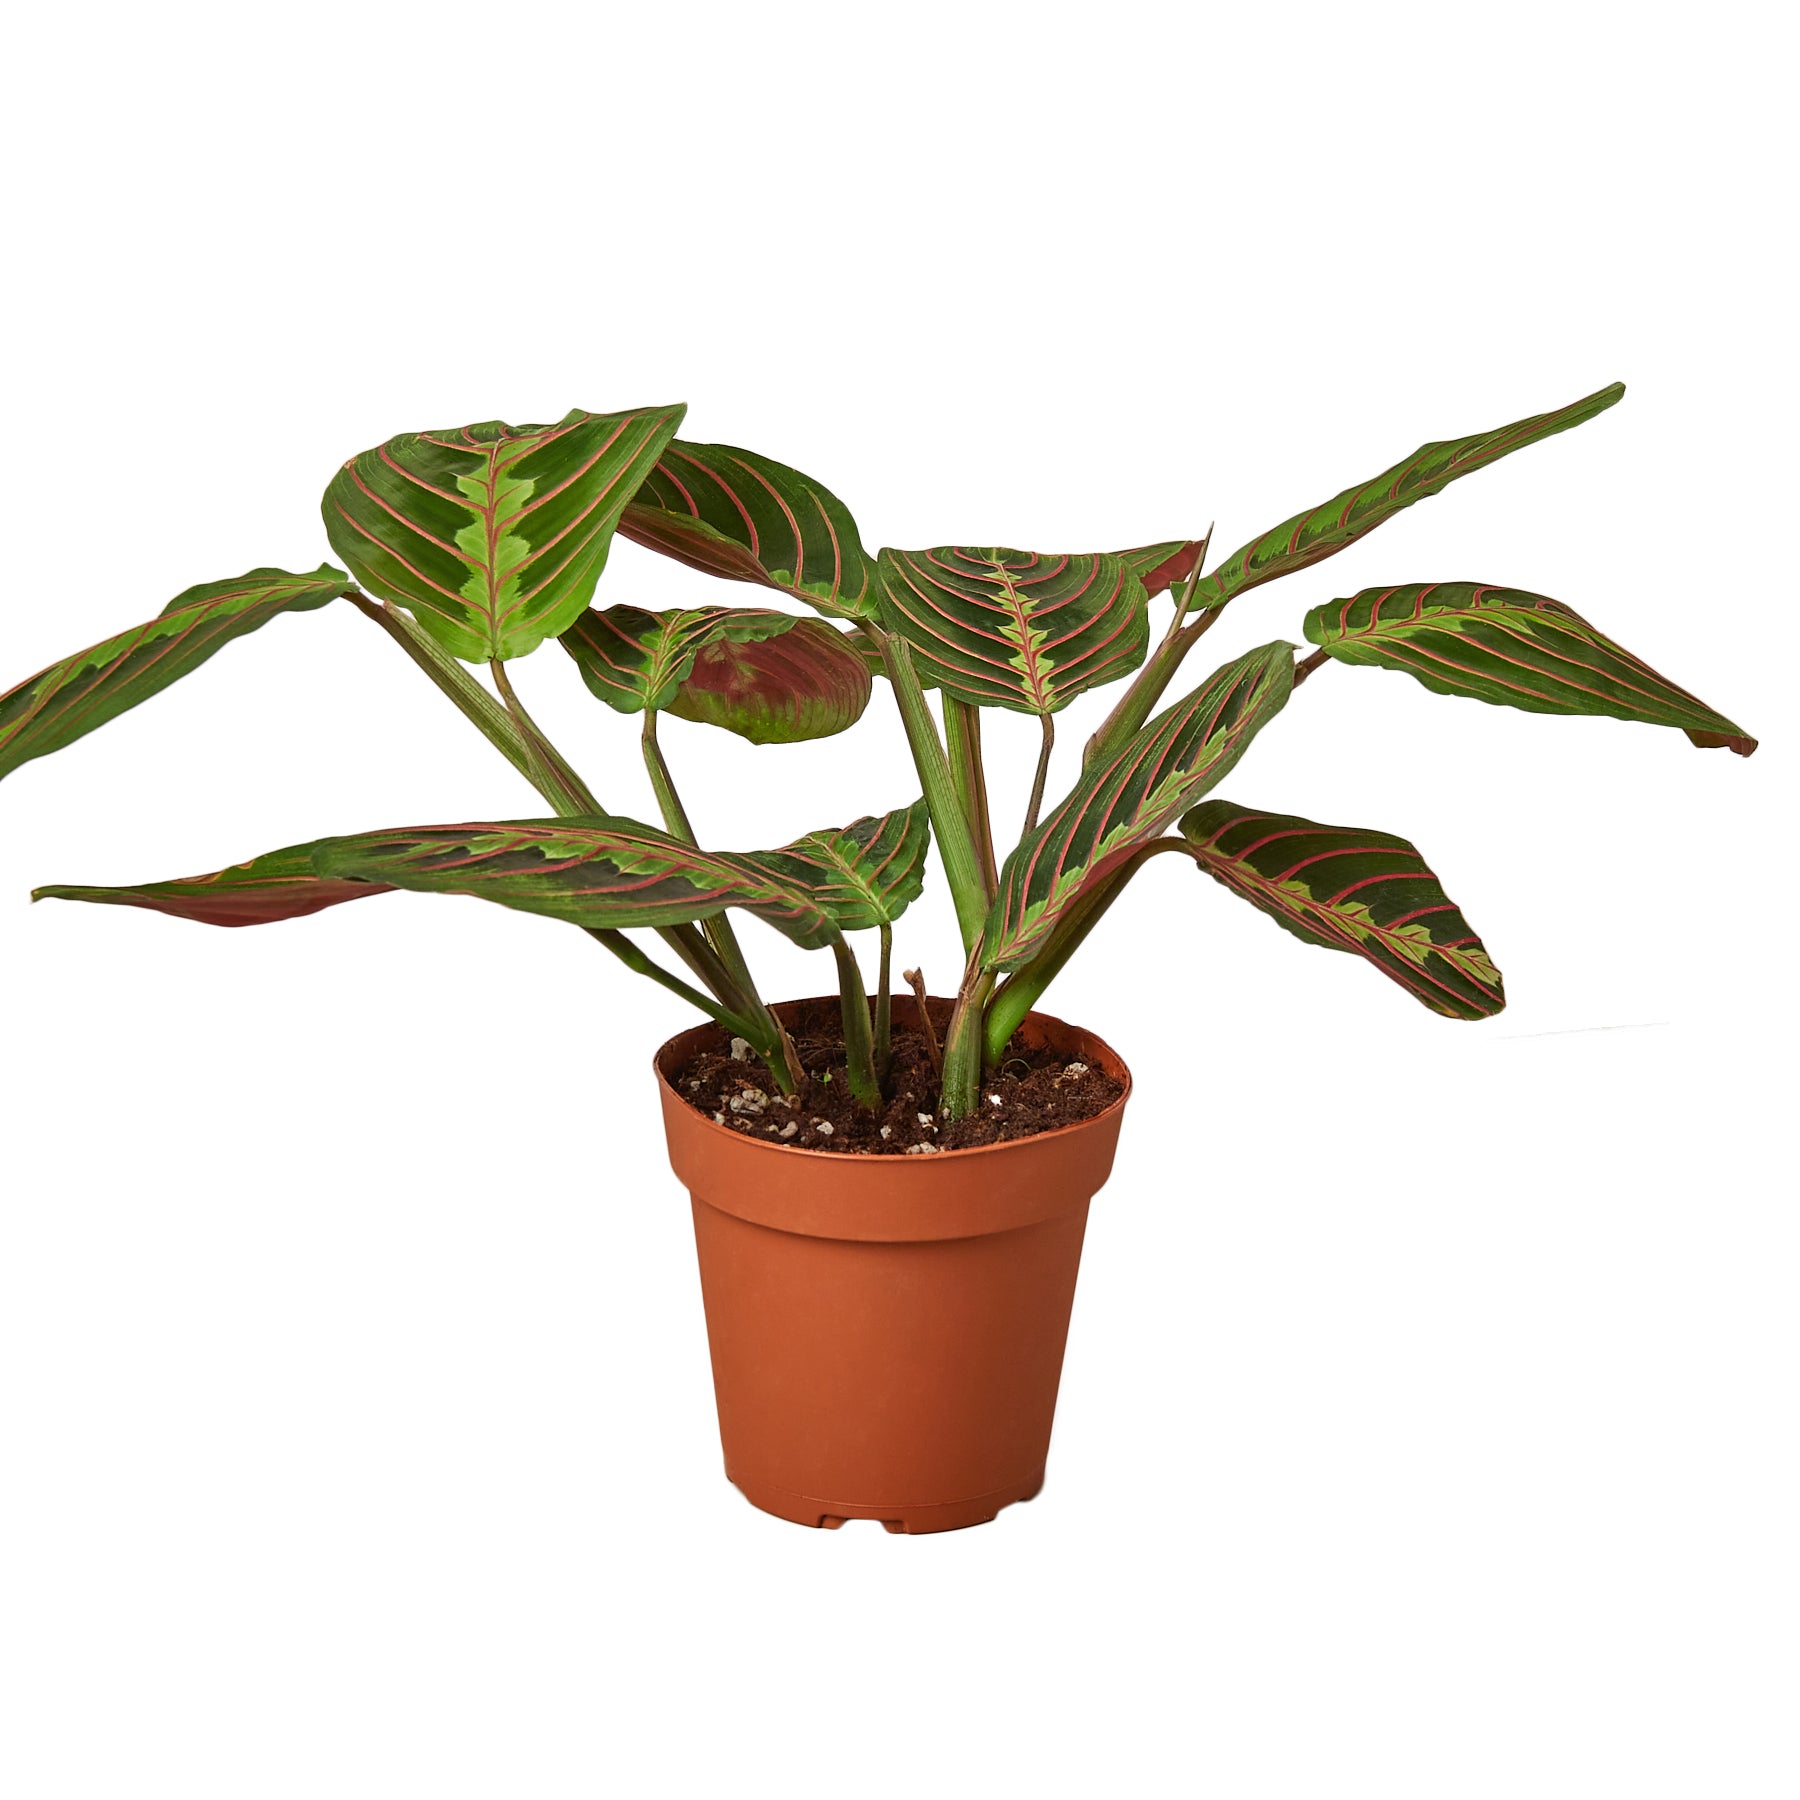 A plant in a brown pot on a white background, available at the best plant nursery near me.